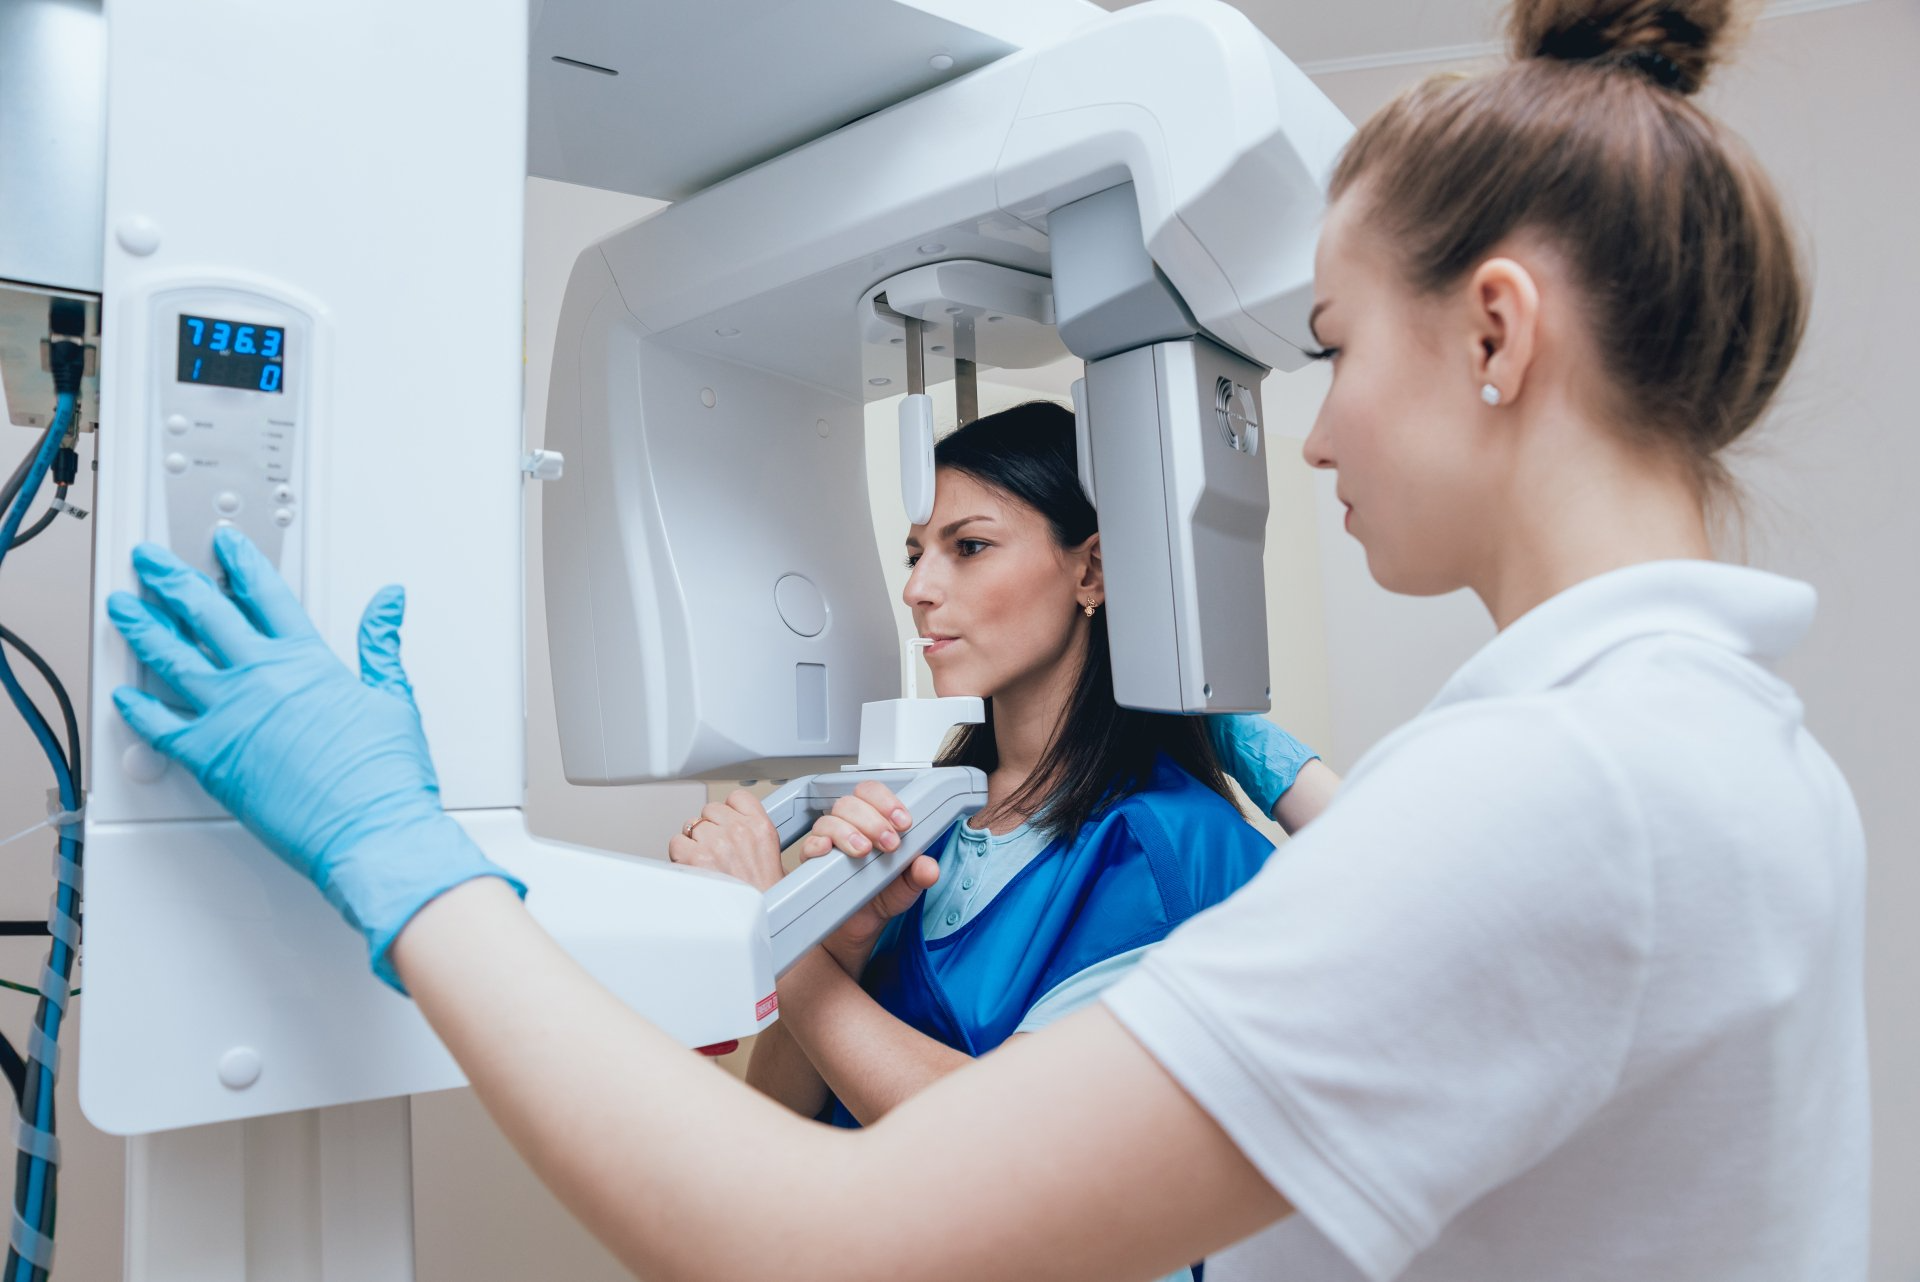 Orthodontic technology | x ray machine | Orthodontist near you | female patient getting an x ray | SmileRight | Best Orthodontist In Houston, Texas